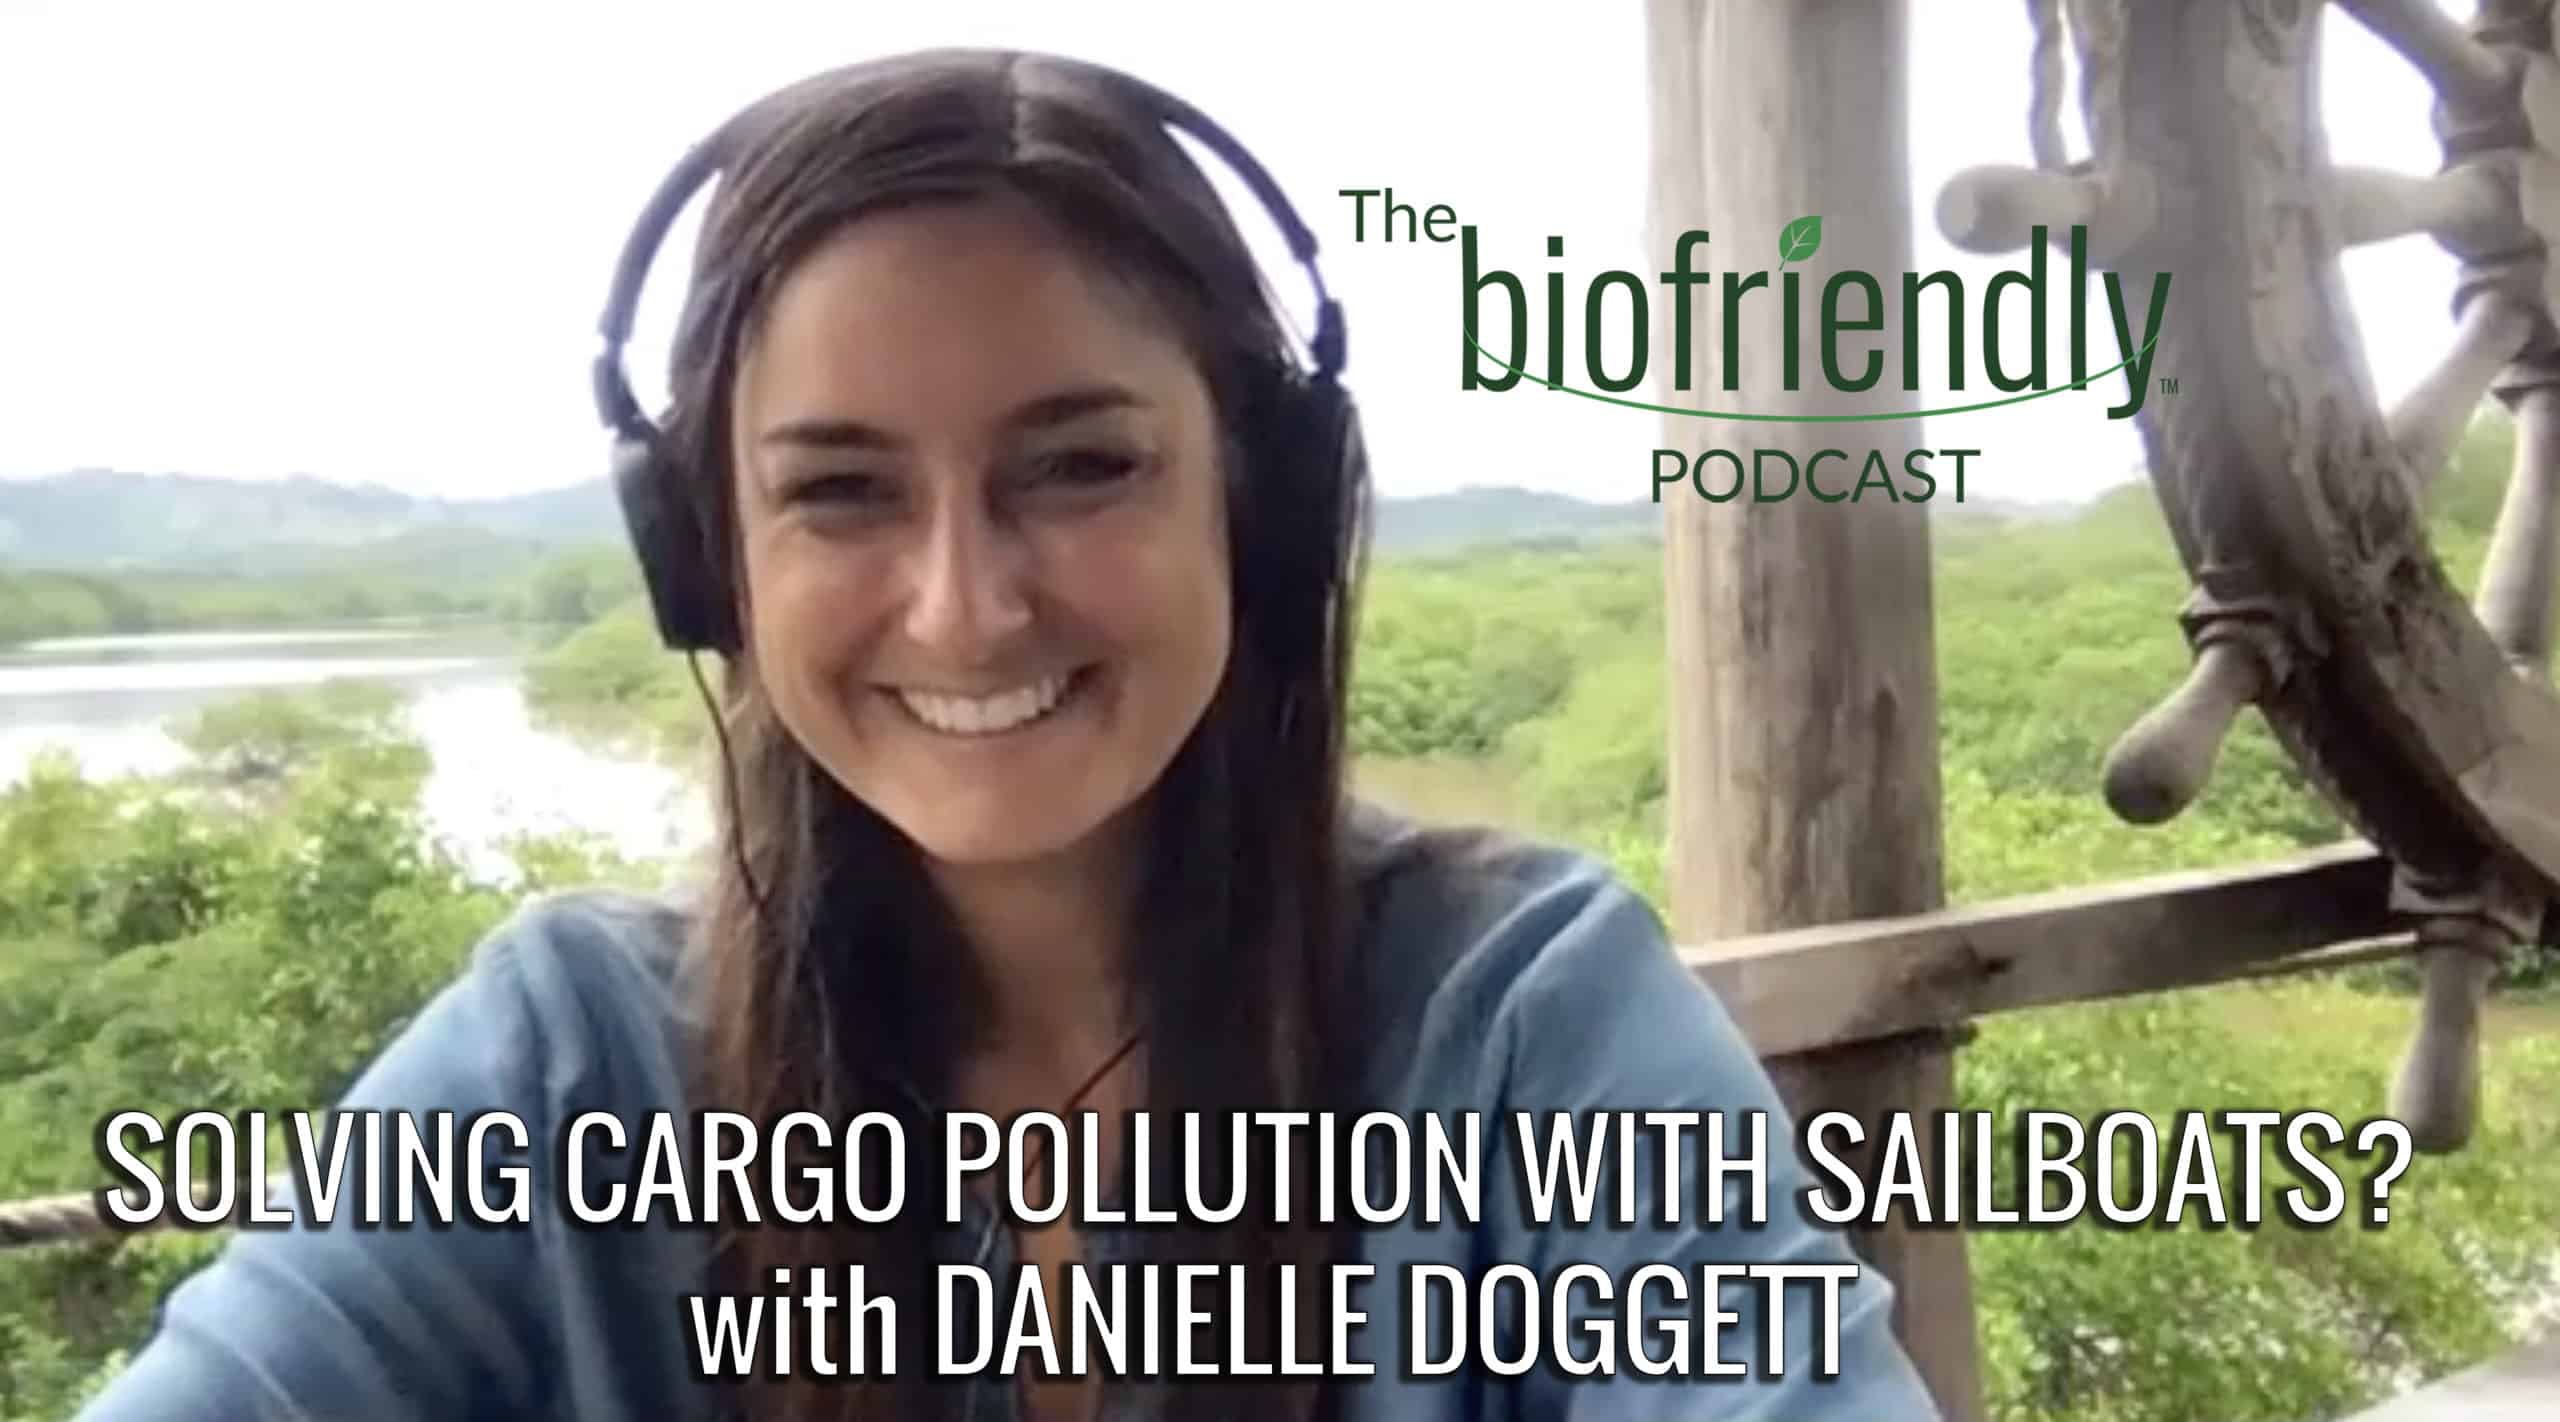 The Biofriendly Podcast - Episode 88 - Solving Cargo Pollution with Sailboats? with Danielle Doggett